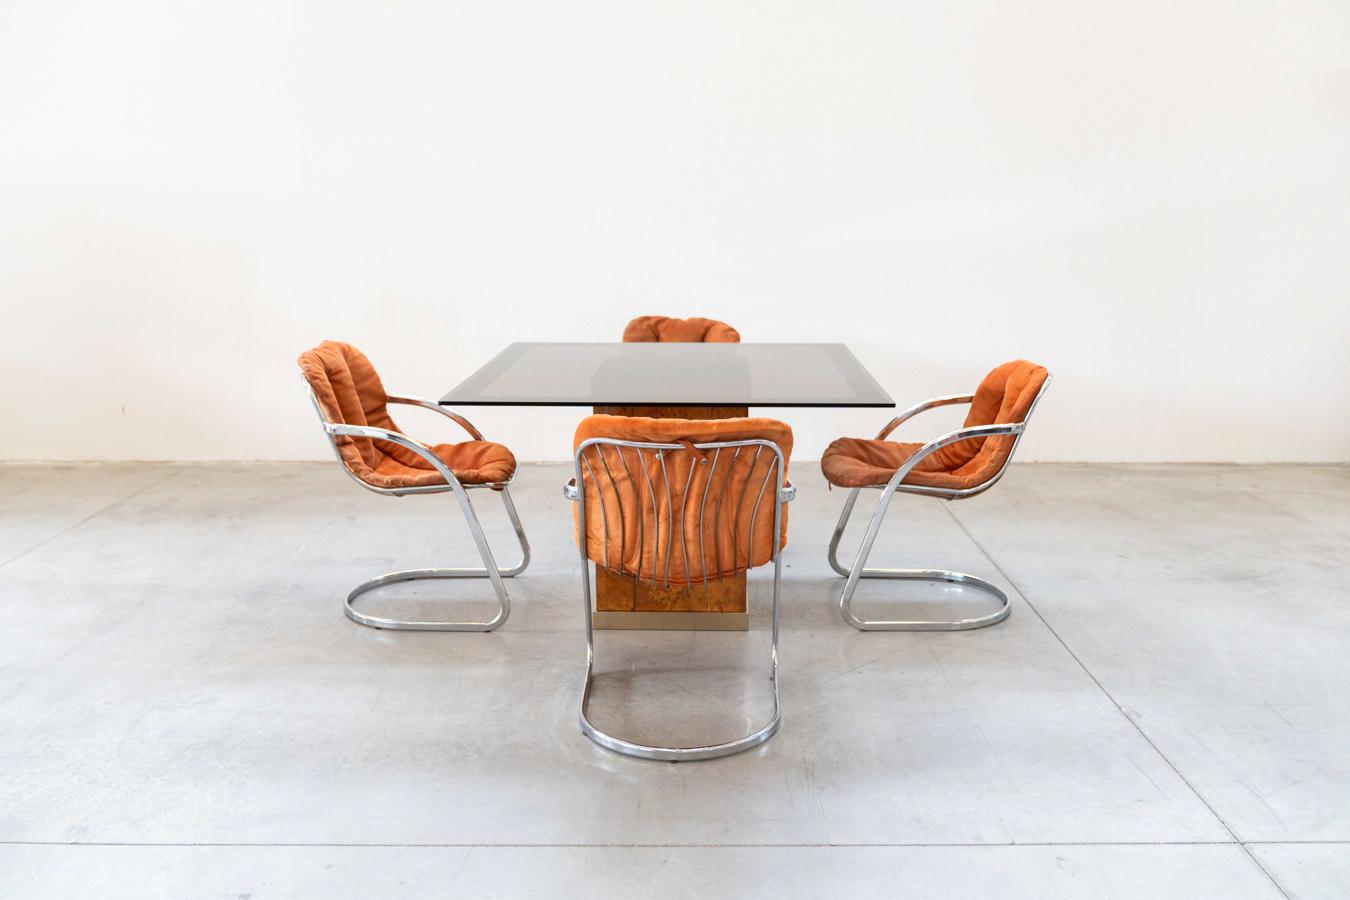 Willy Rizzo style table and chairs by Gastone Rinaldi for Rima, 1970s	
DESCRIPTION	Table with briarwood and brass base, and smoked glass top. The chairs are made of chrome-plated iron with suede upholstery
PIECES	5
DESIGN PERIOD	1970
PRODUCTION